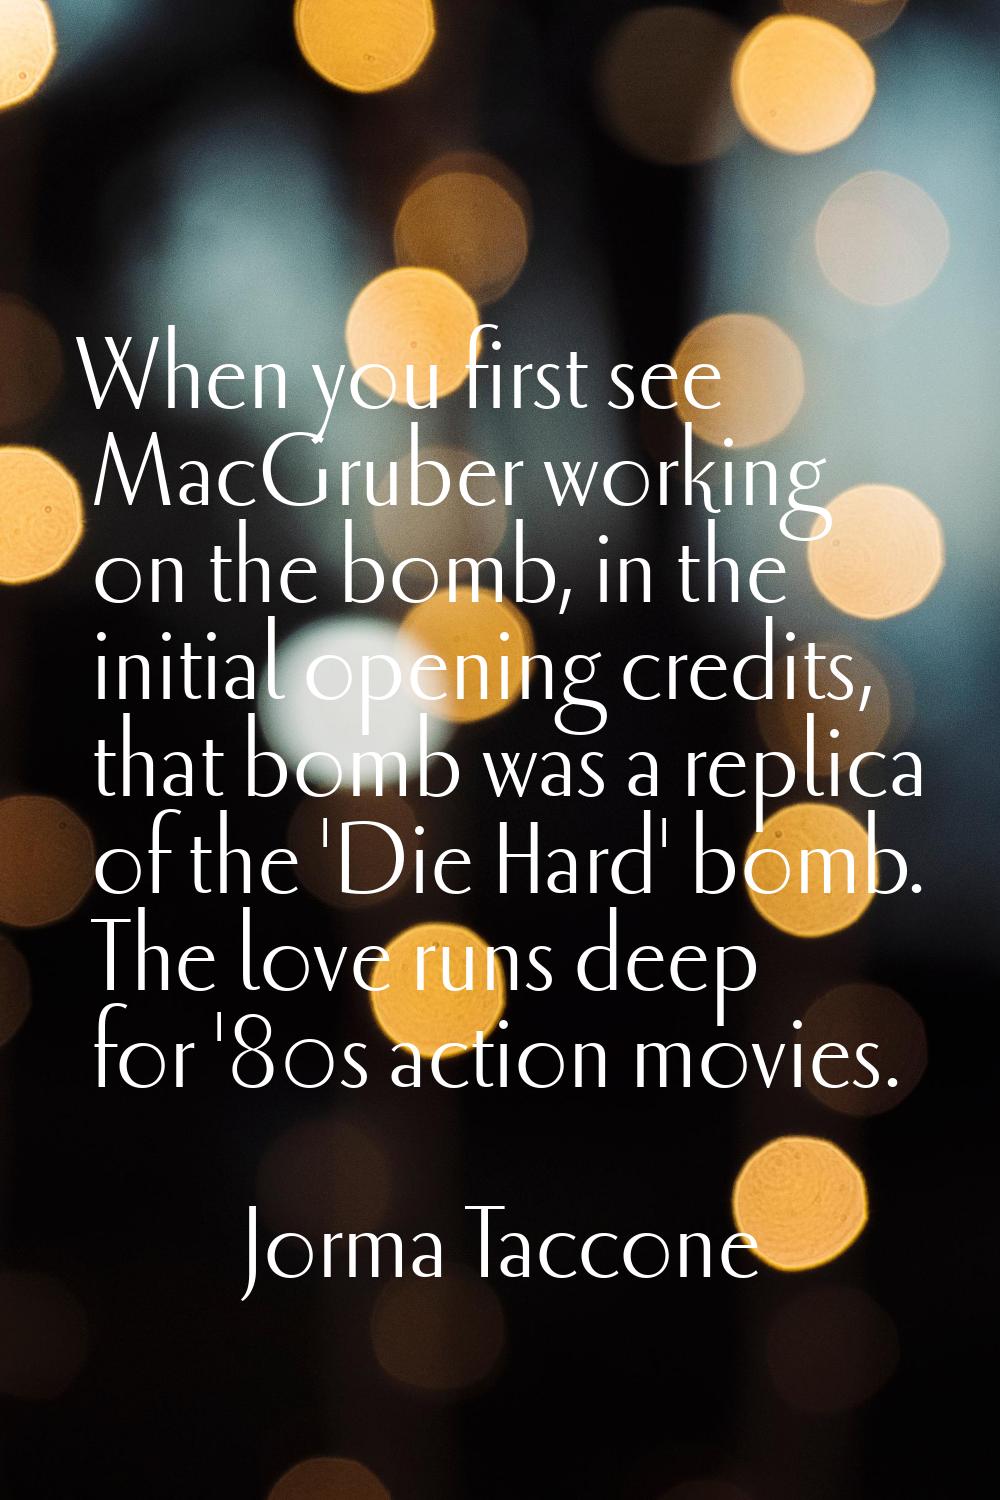 When you first see MacGruber working on the bomb, in the initial opening credits, that bomb was a r